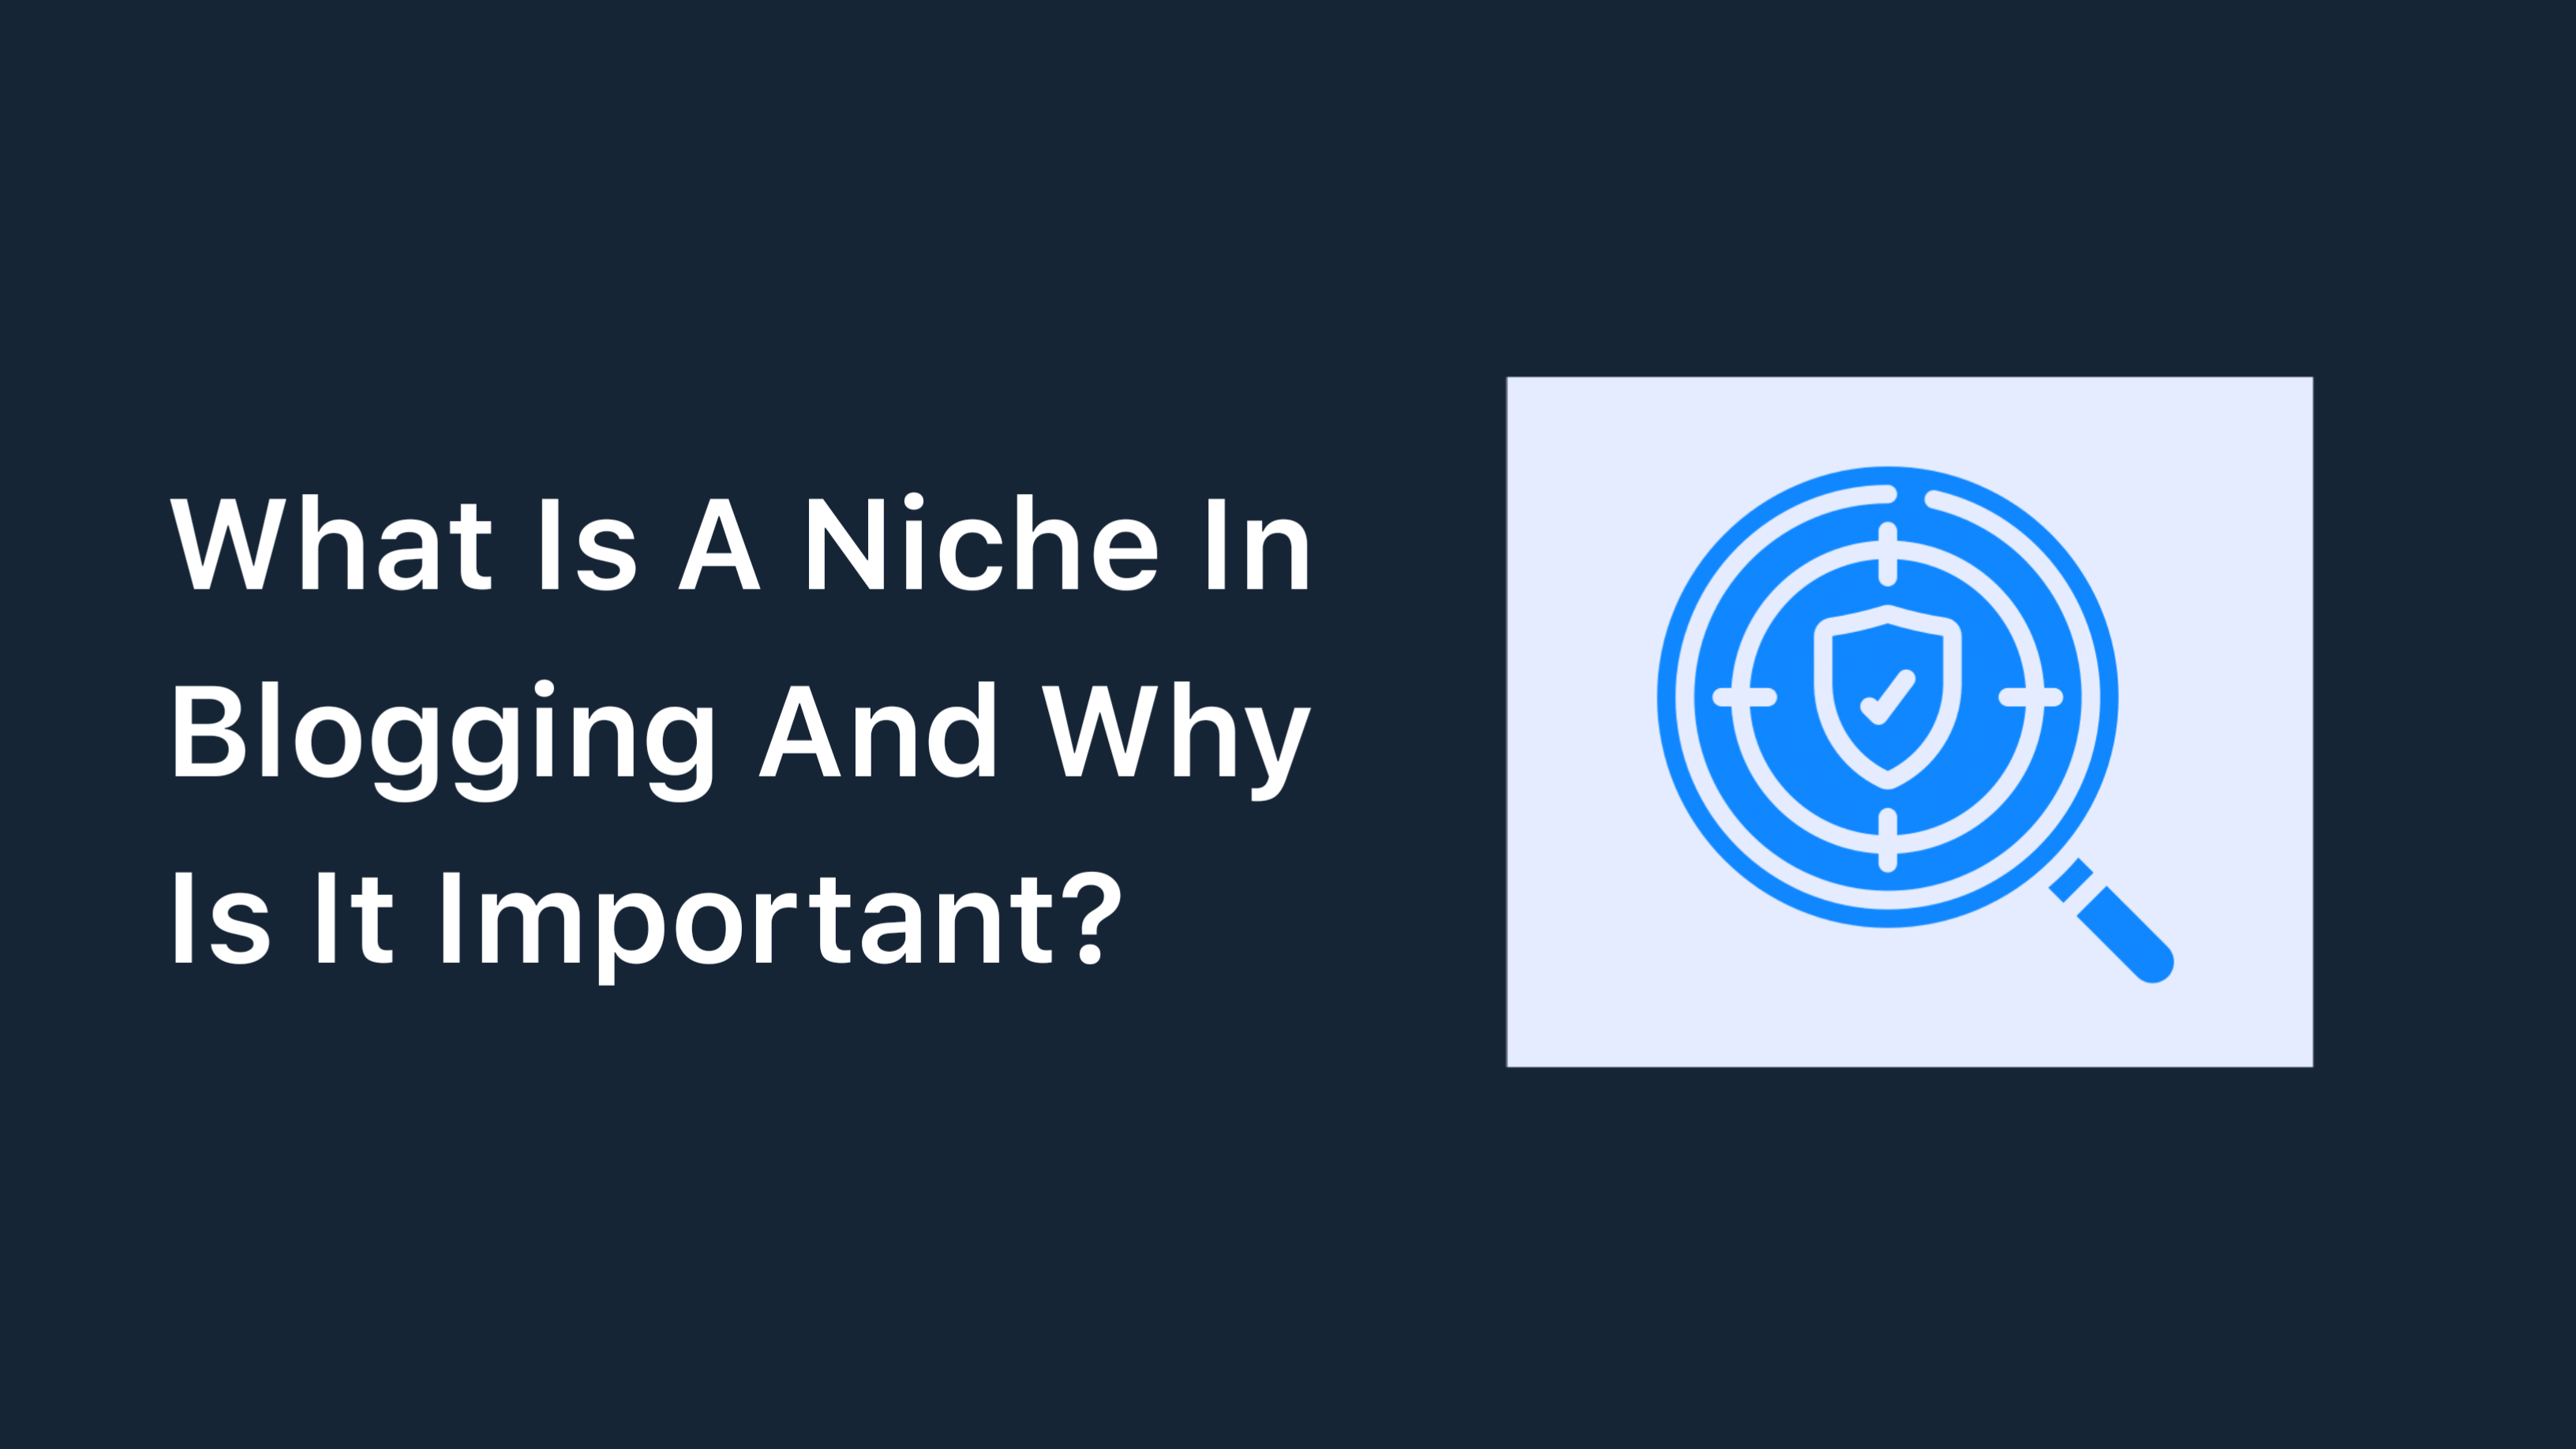 What Is A Niche In Blogging And Why Is It Important?